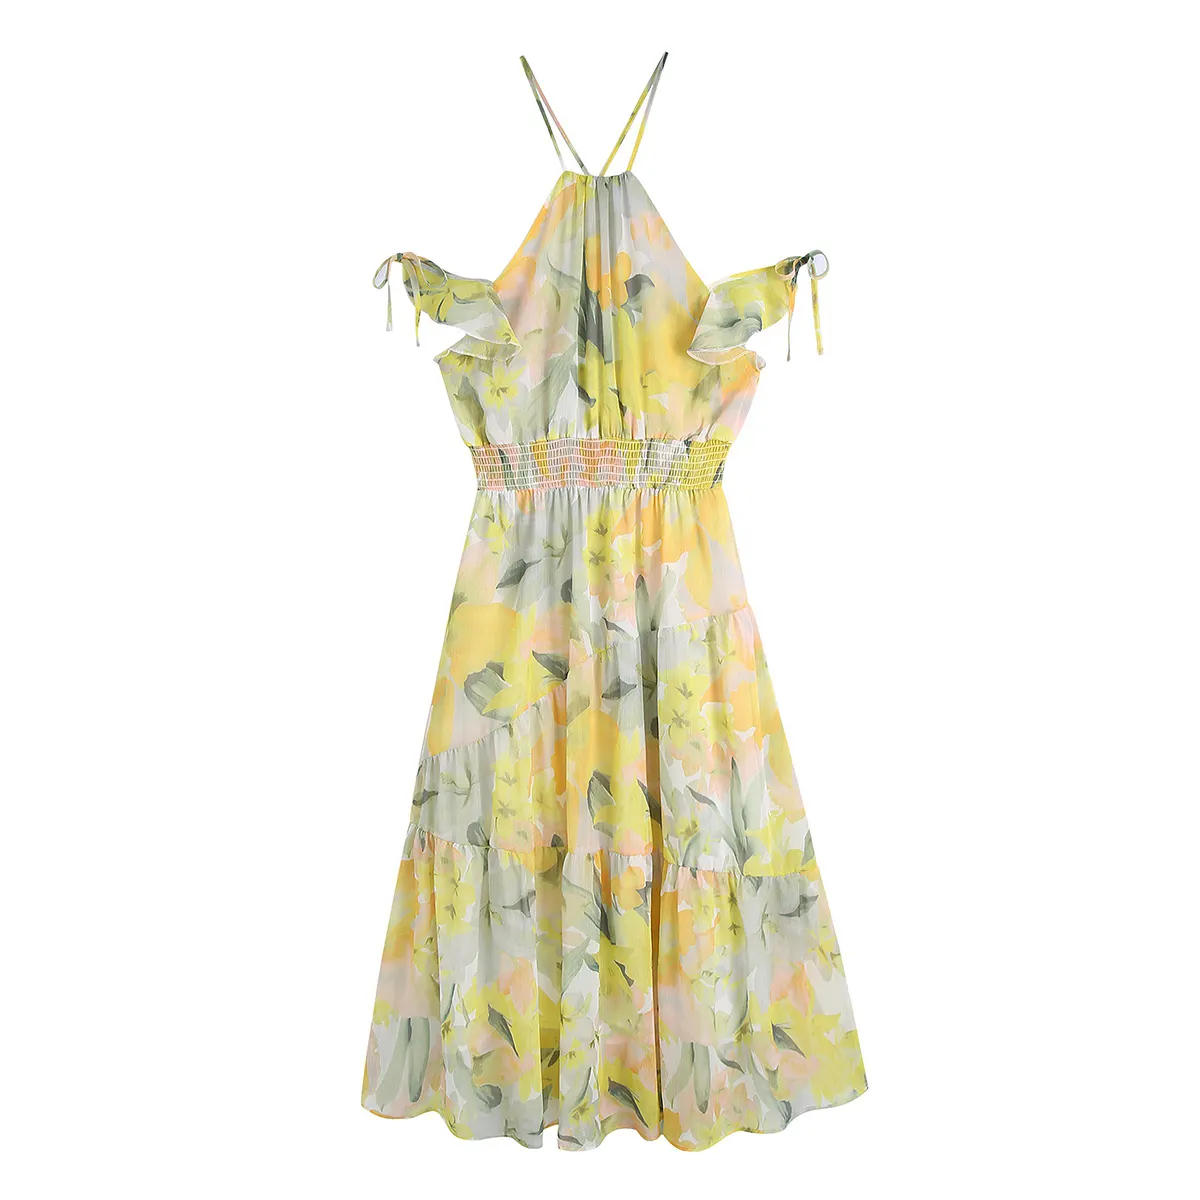 Dresses Women Printed Yellow Color Floral Print Sleeveless Elastic Waist Casual Fashion Summer Dress For Women